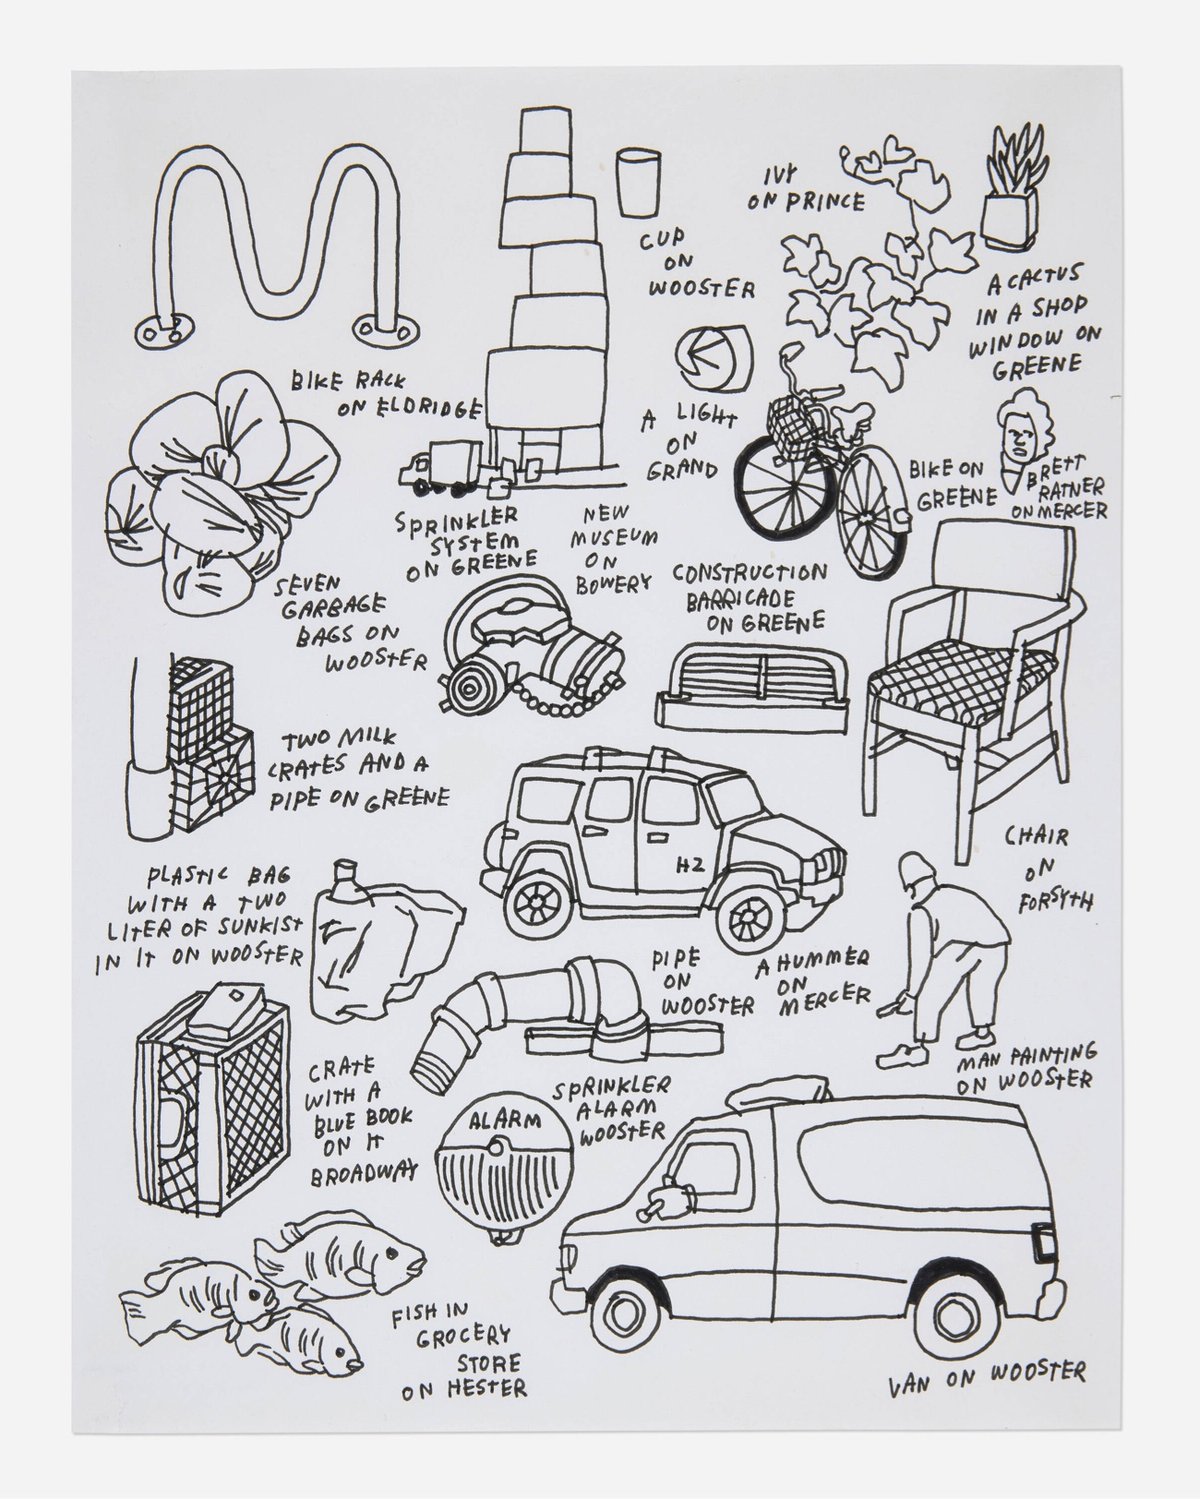 drawings of some things found on the streets of NYC